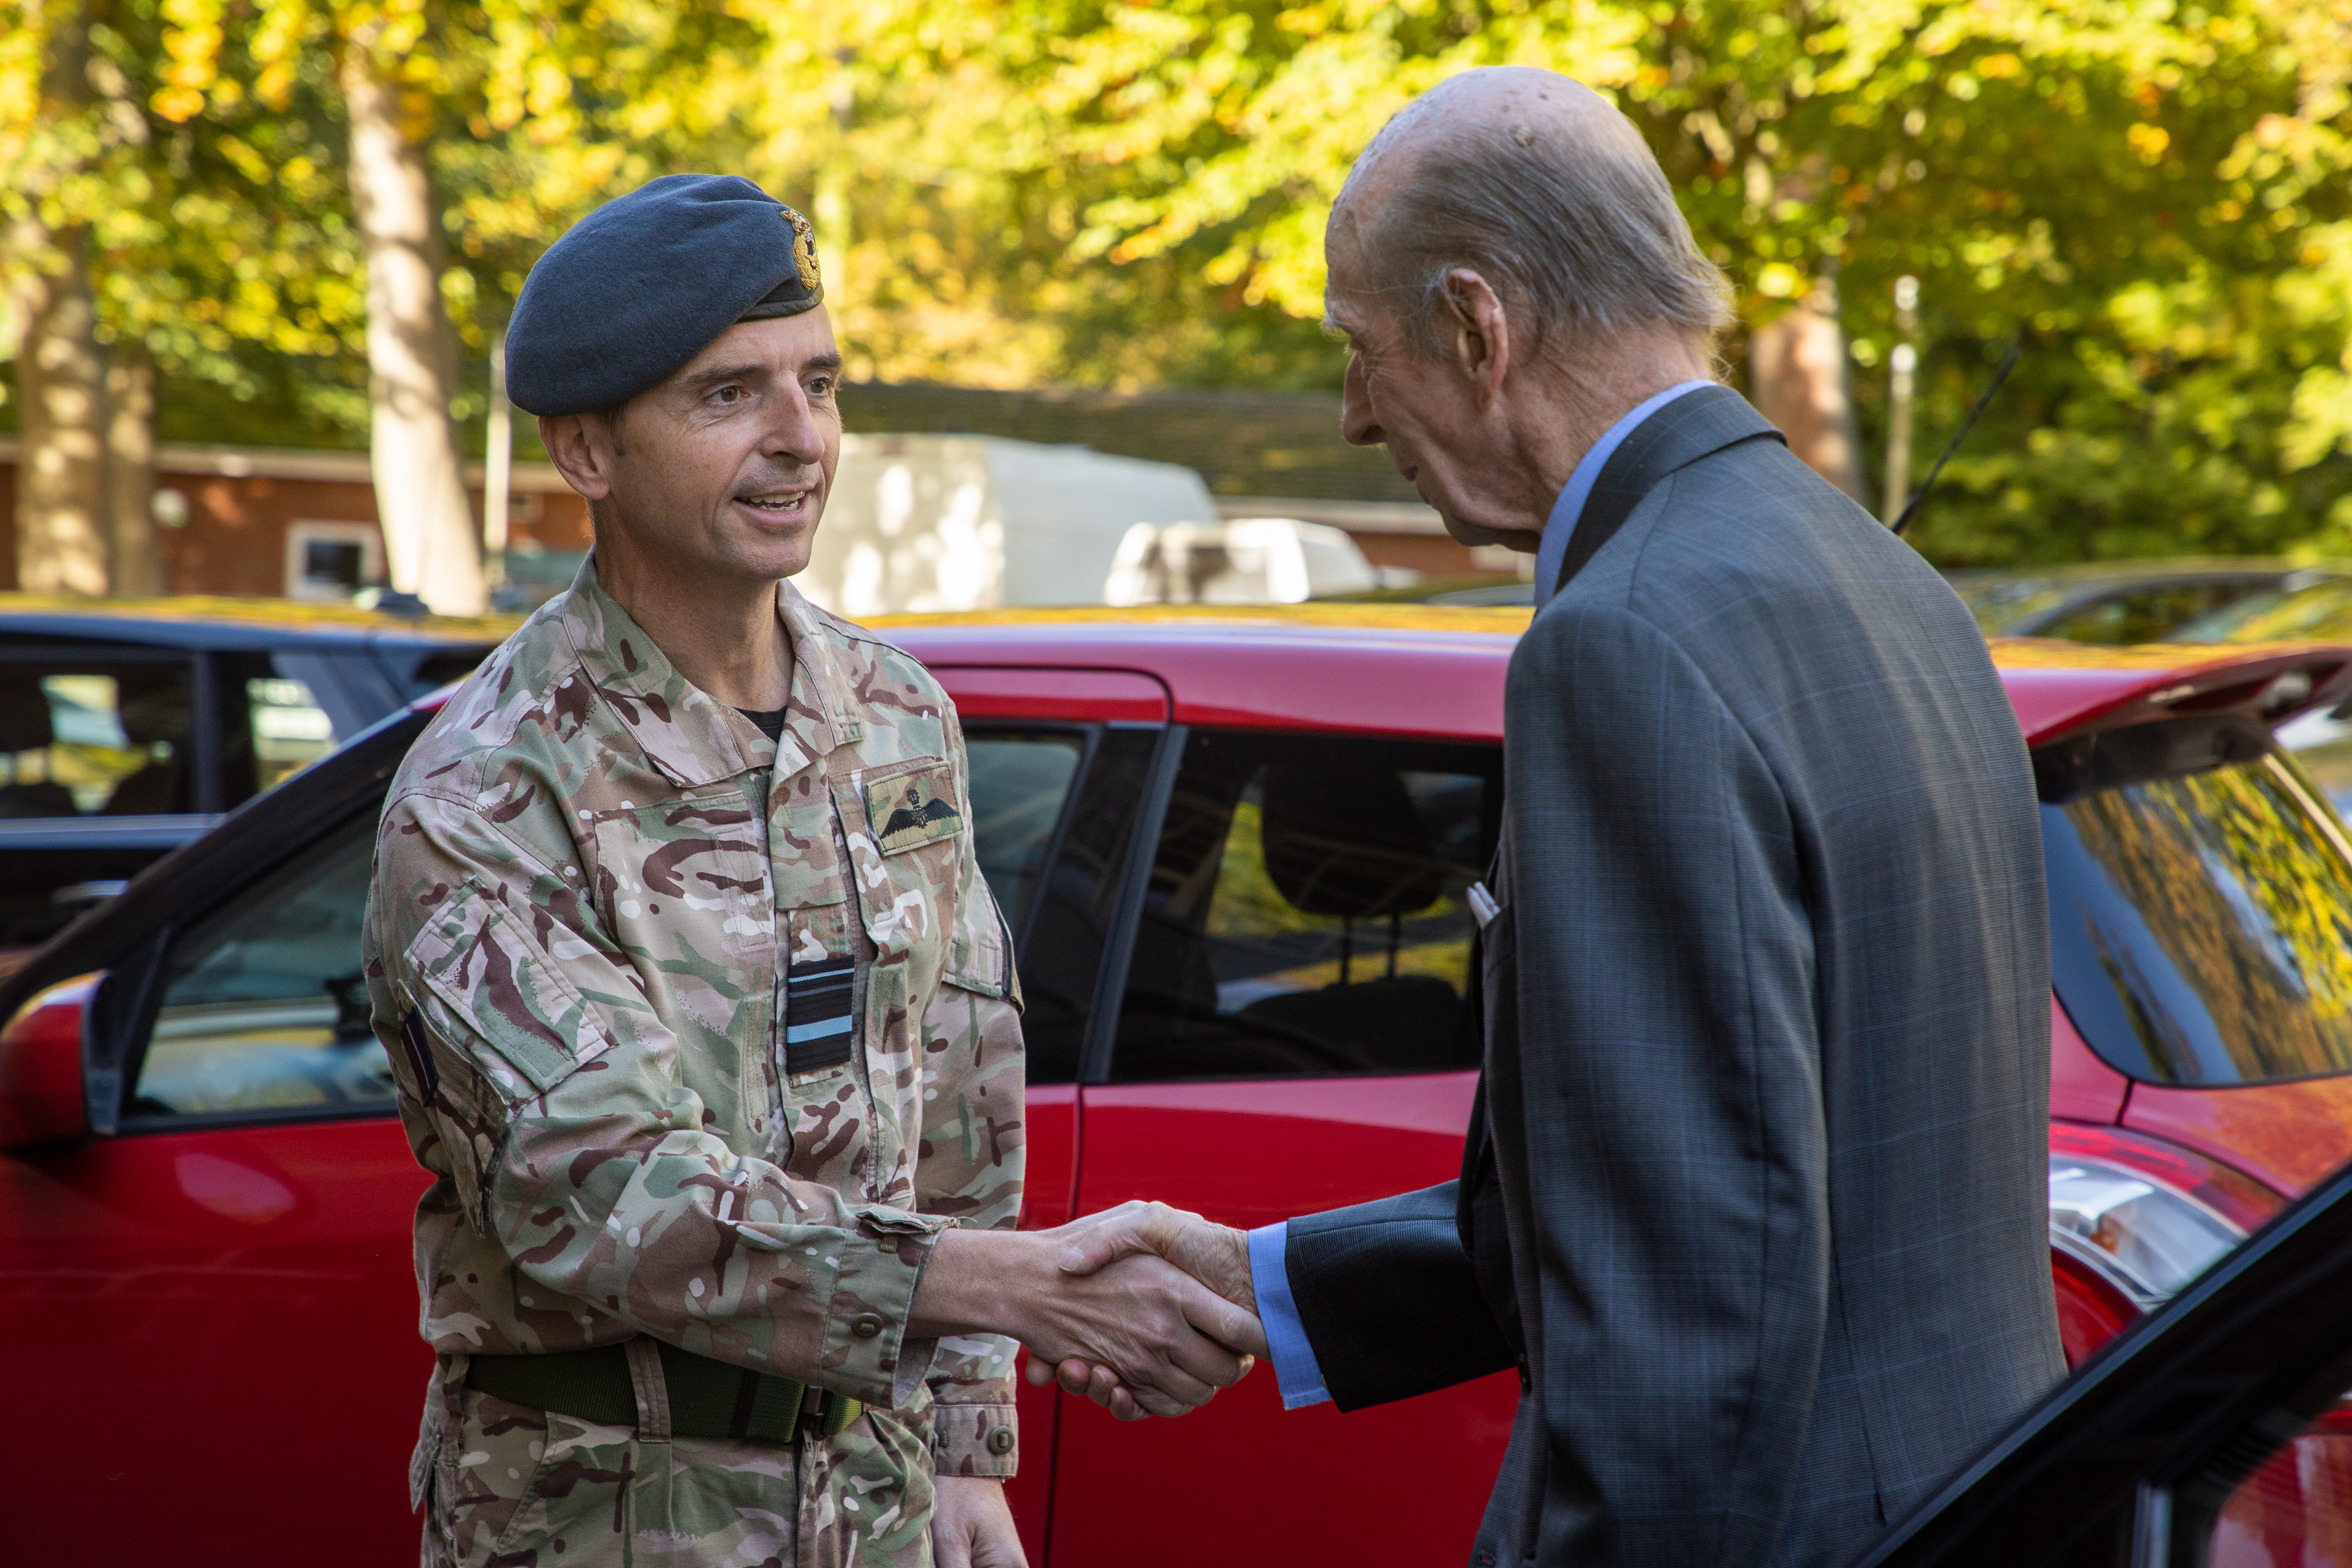 Image shows The Duke of Kent shaking hands with RAF personnel by car.